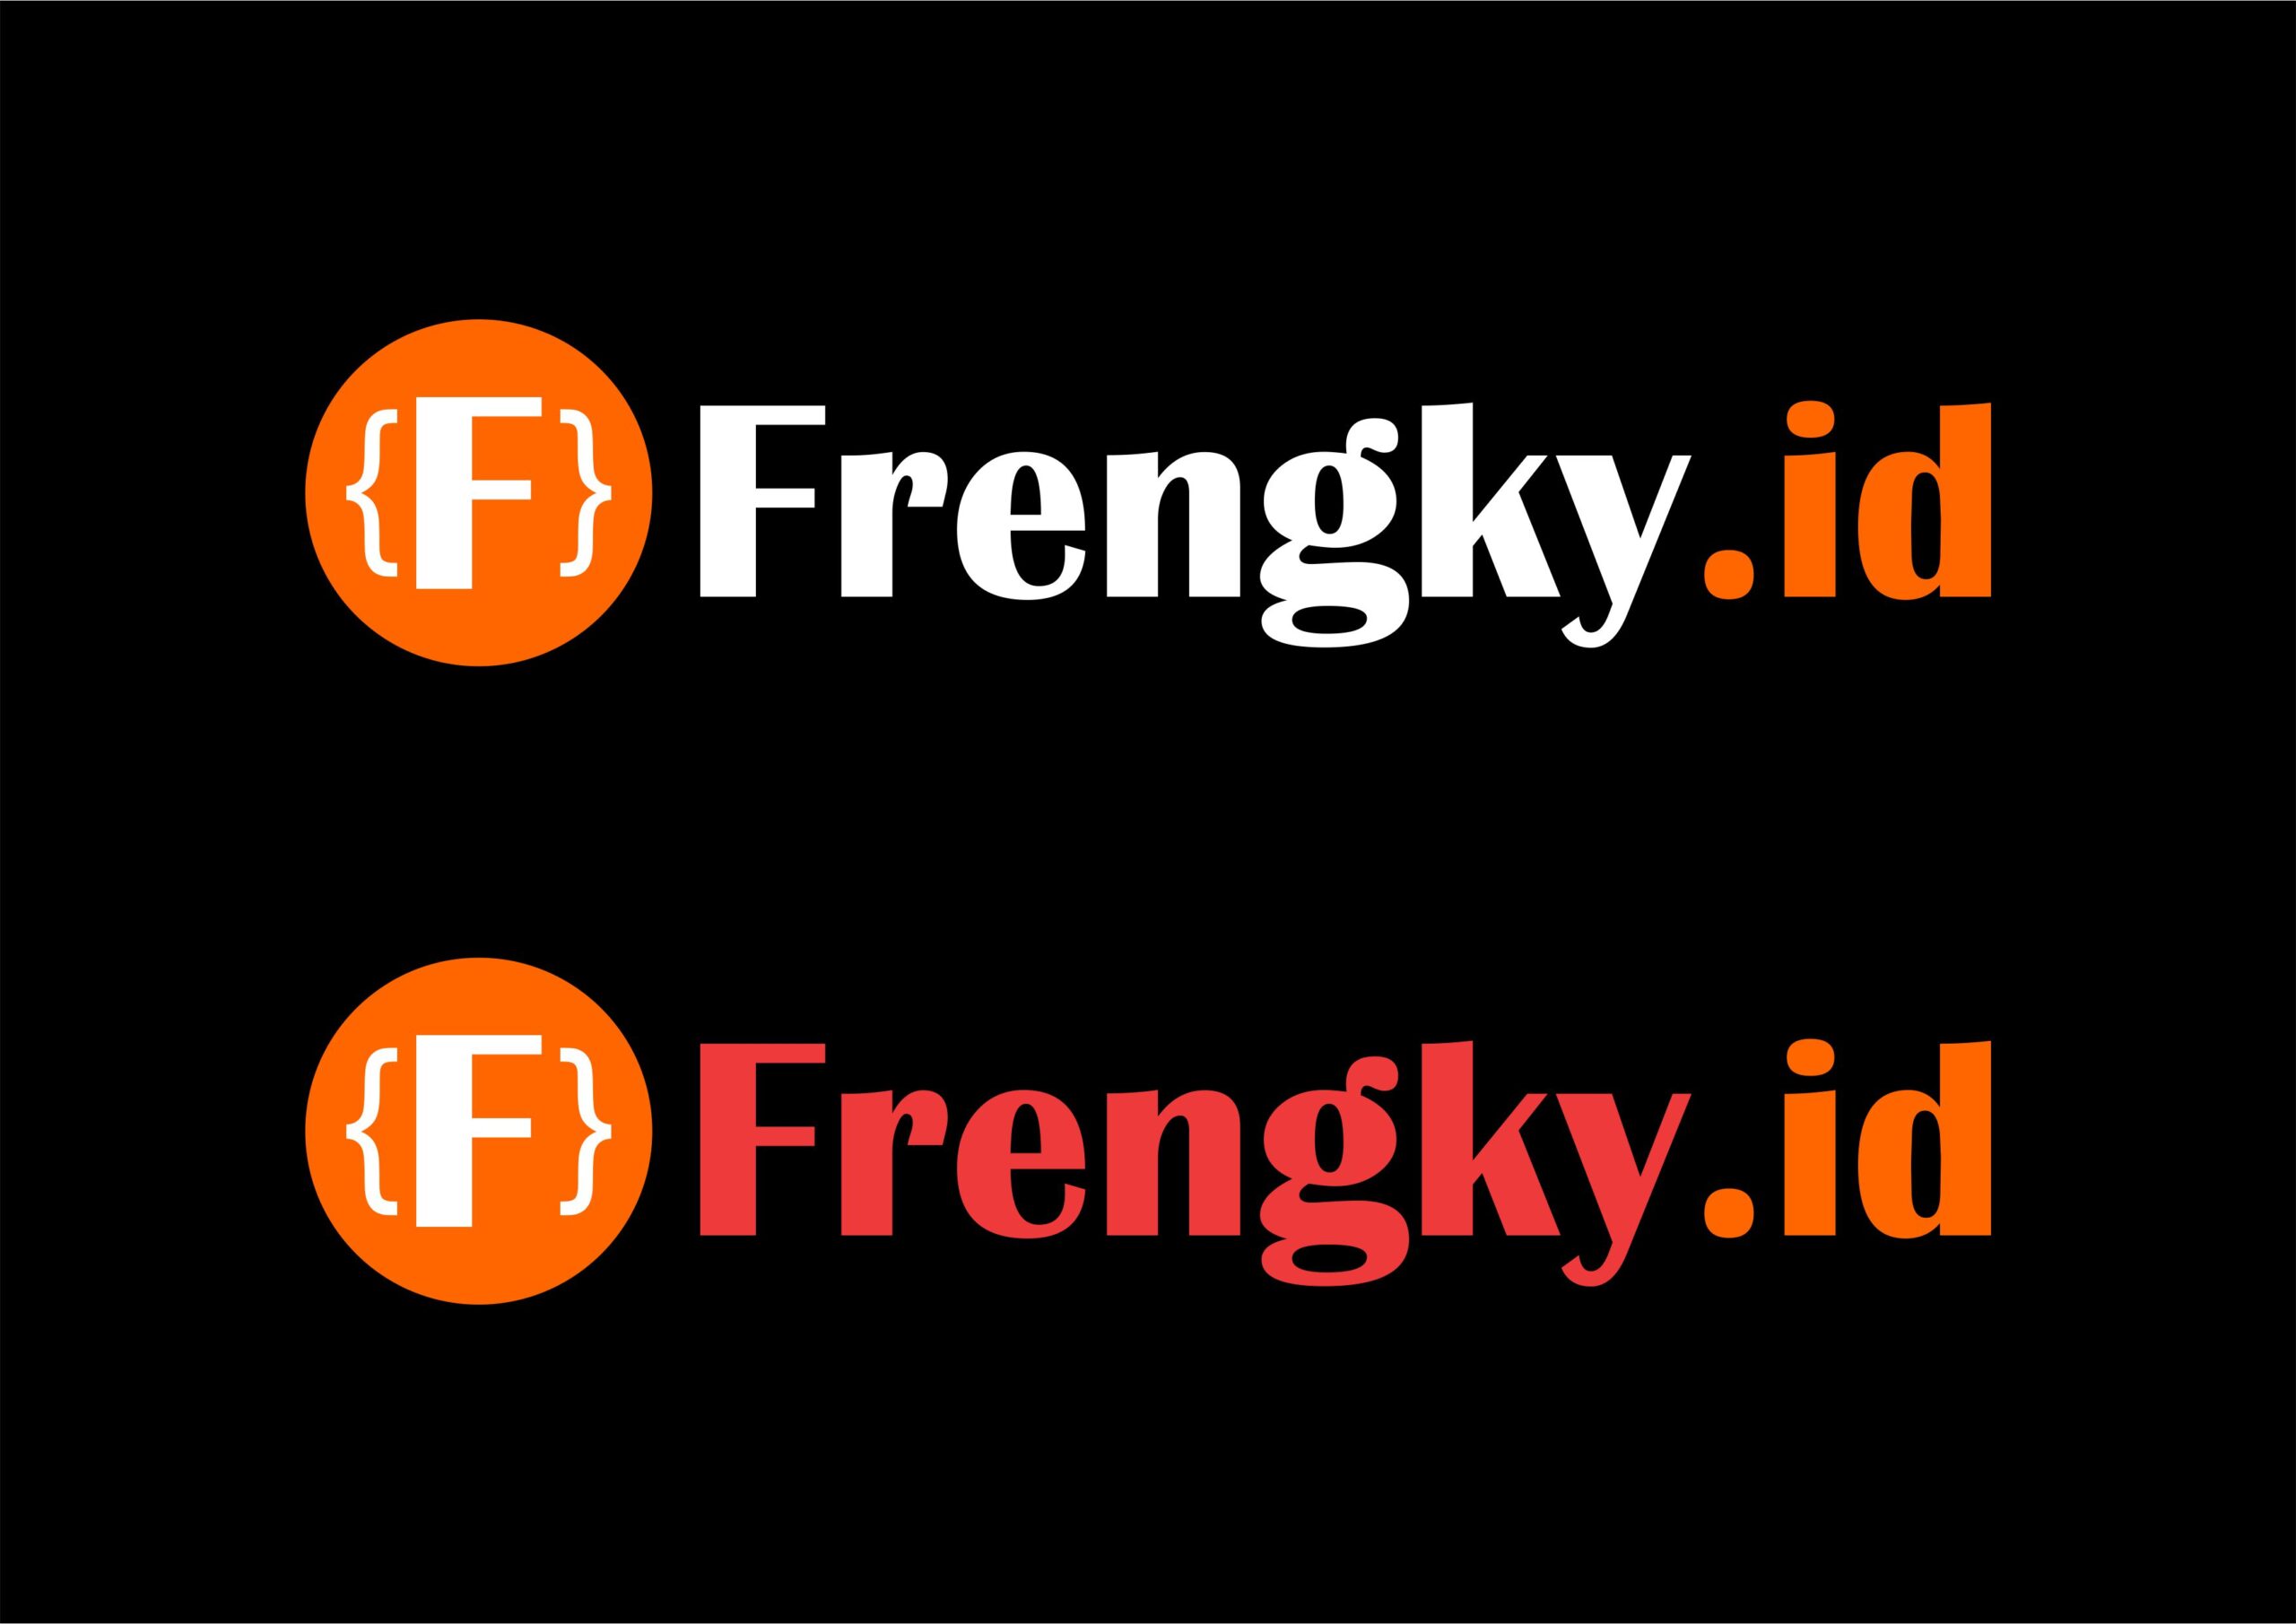 Frengky Id Logo Vector scaled